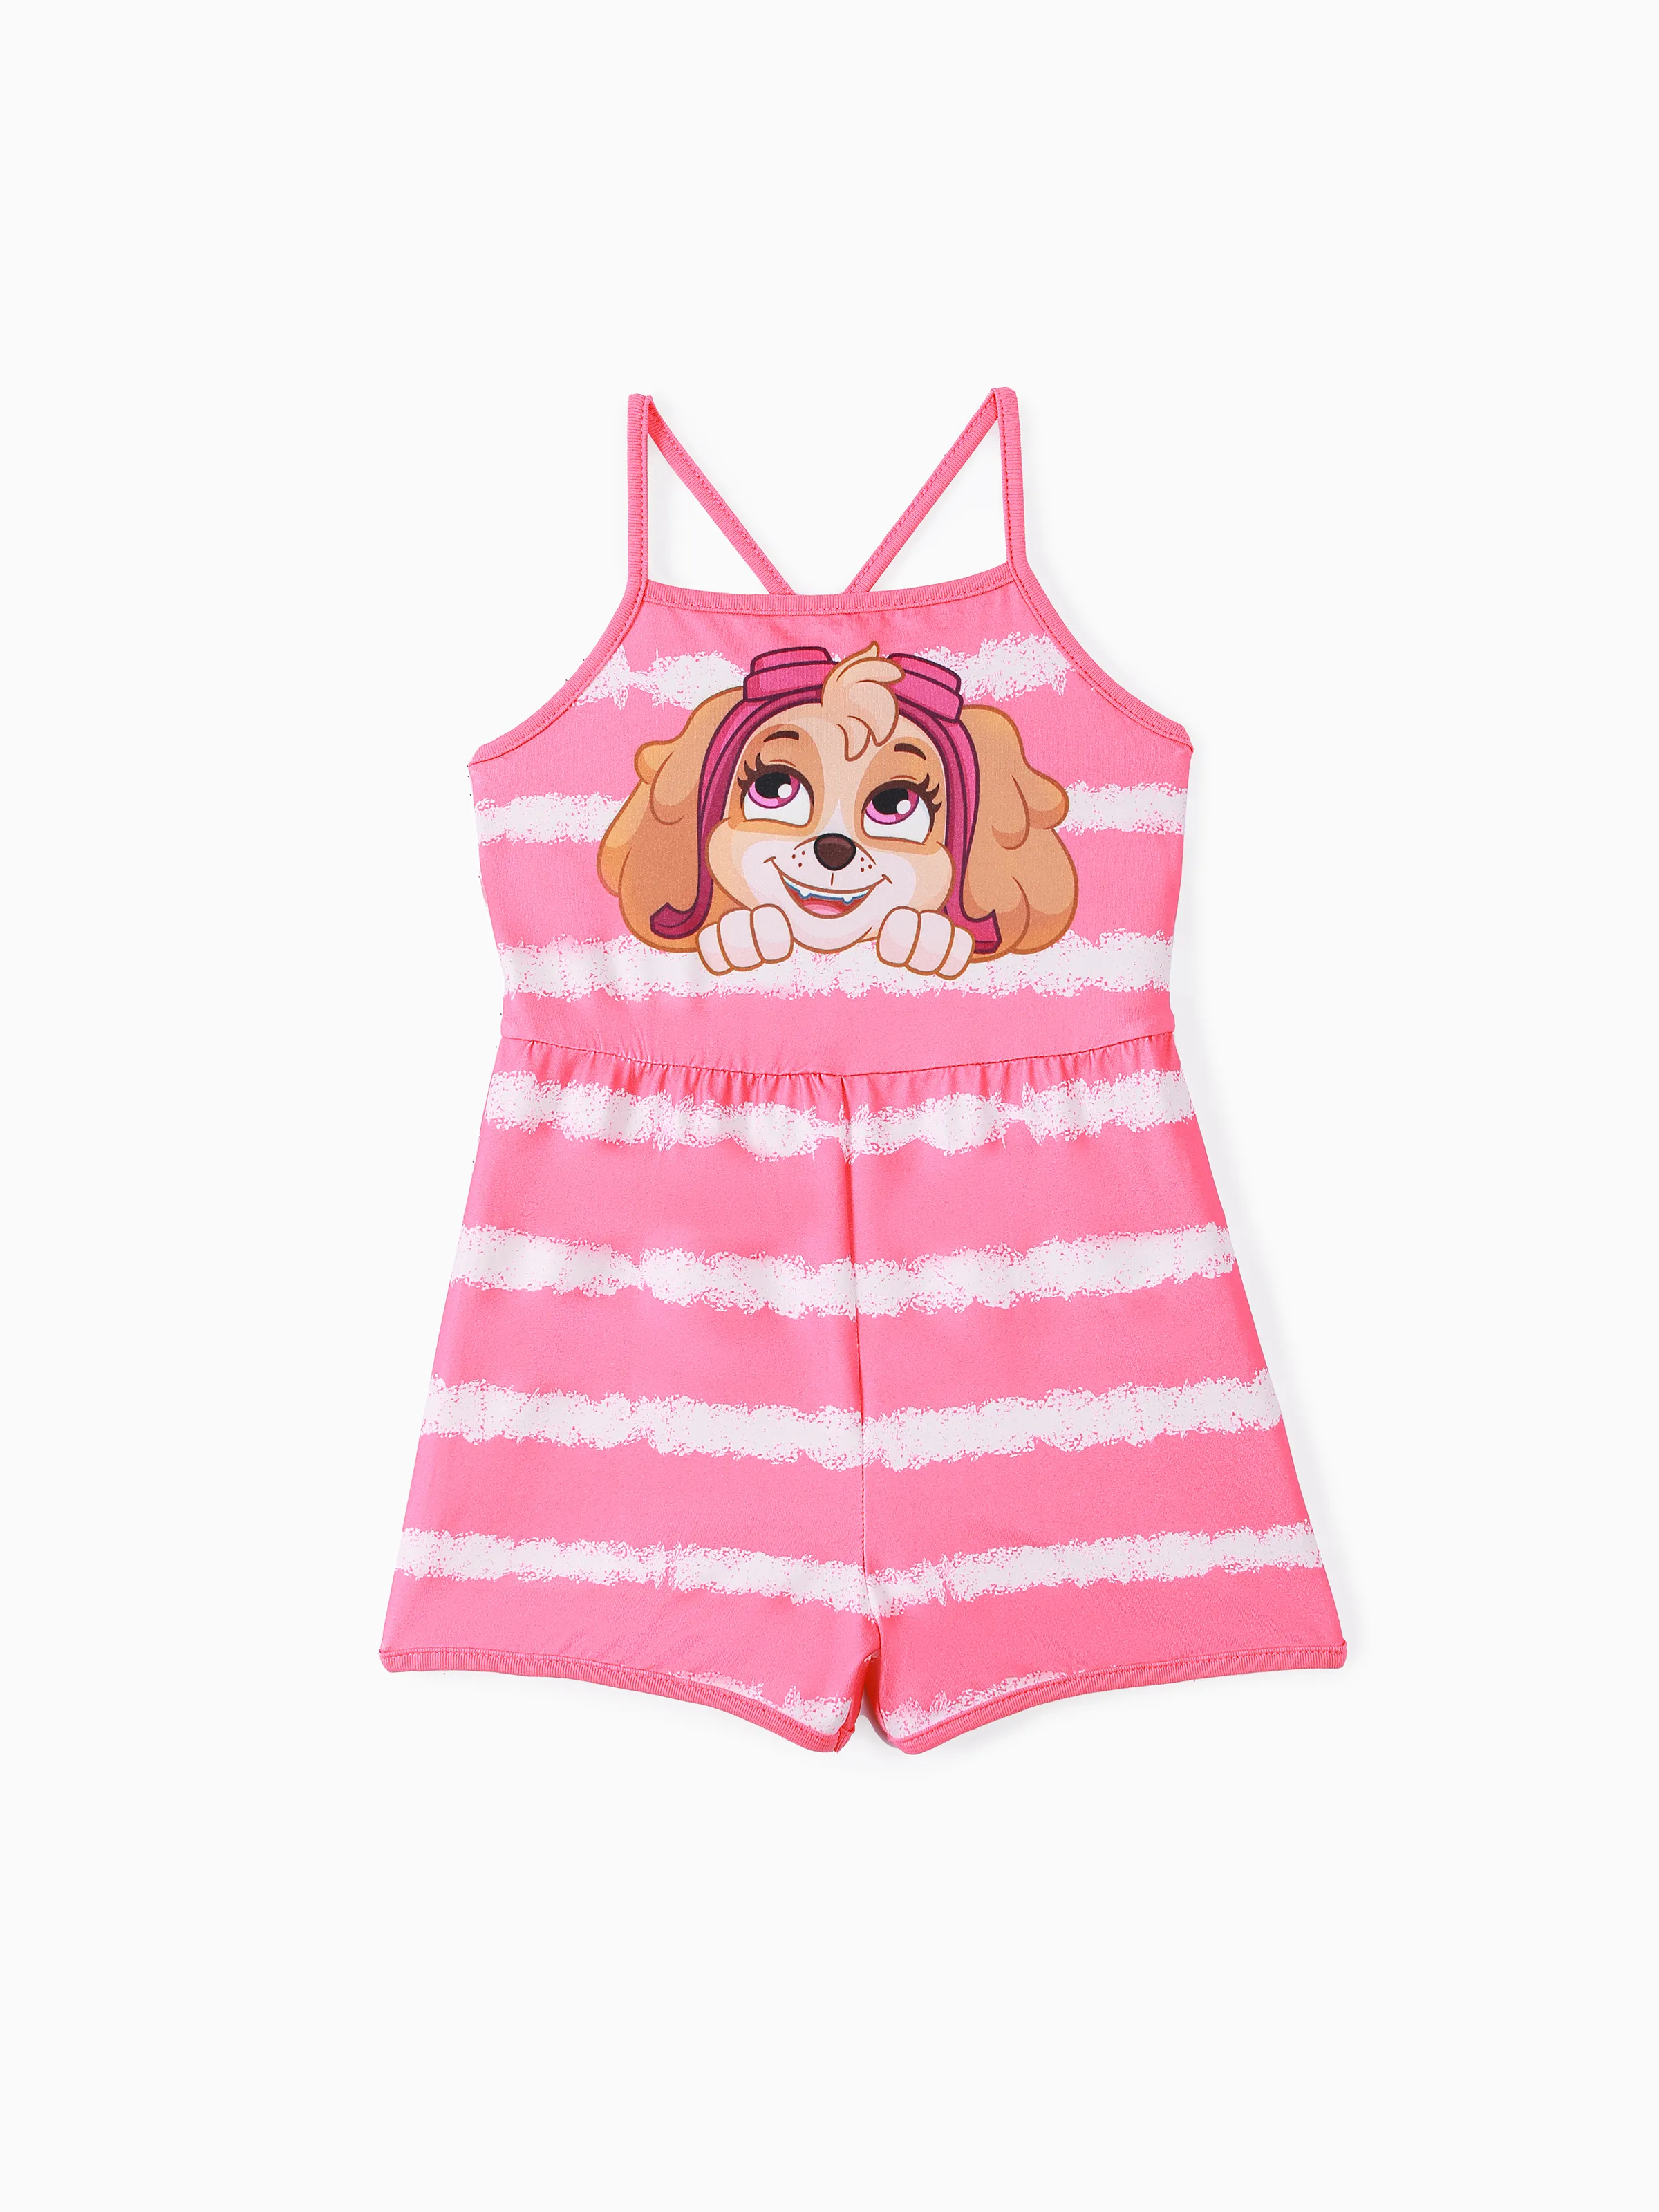 

PAW Patrol 1pc Toddler Girls Character Print Striped Romper